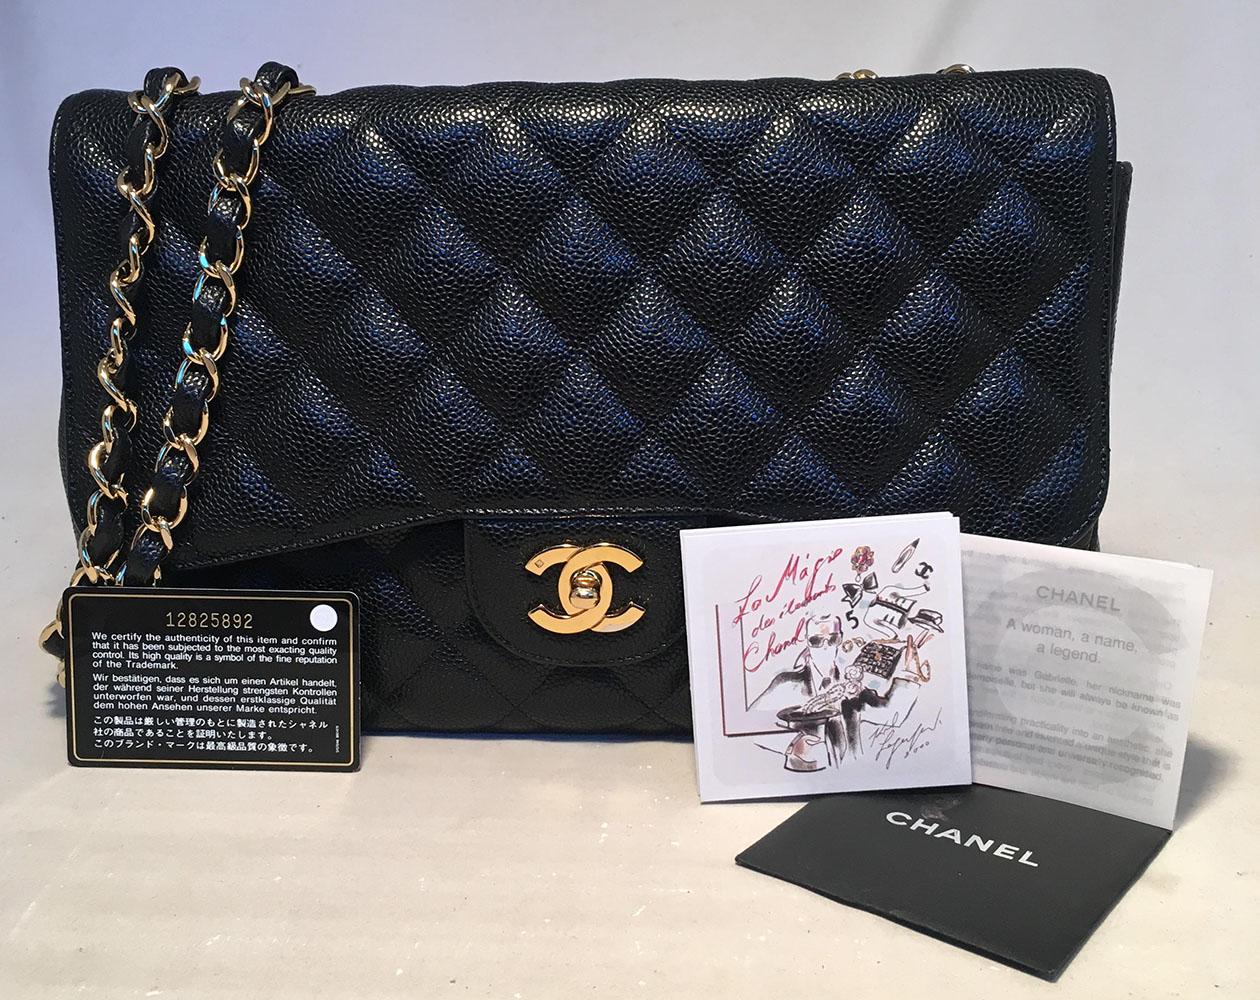 Chanel Black Quilted Caviar Leather Maxi Classic Flap Shoulder Bag 7